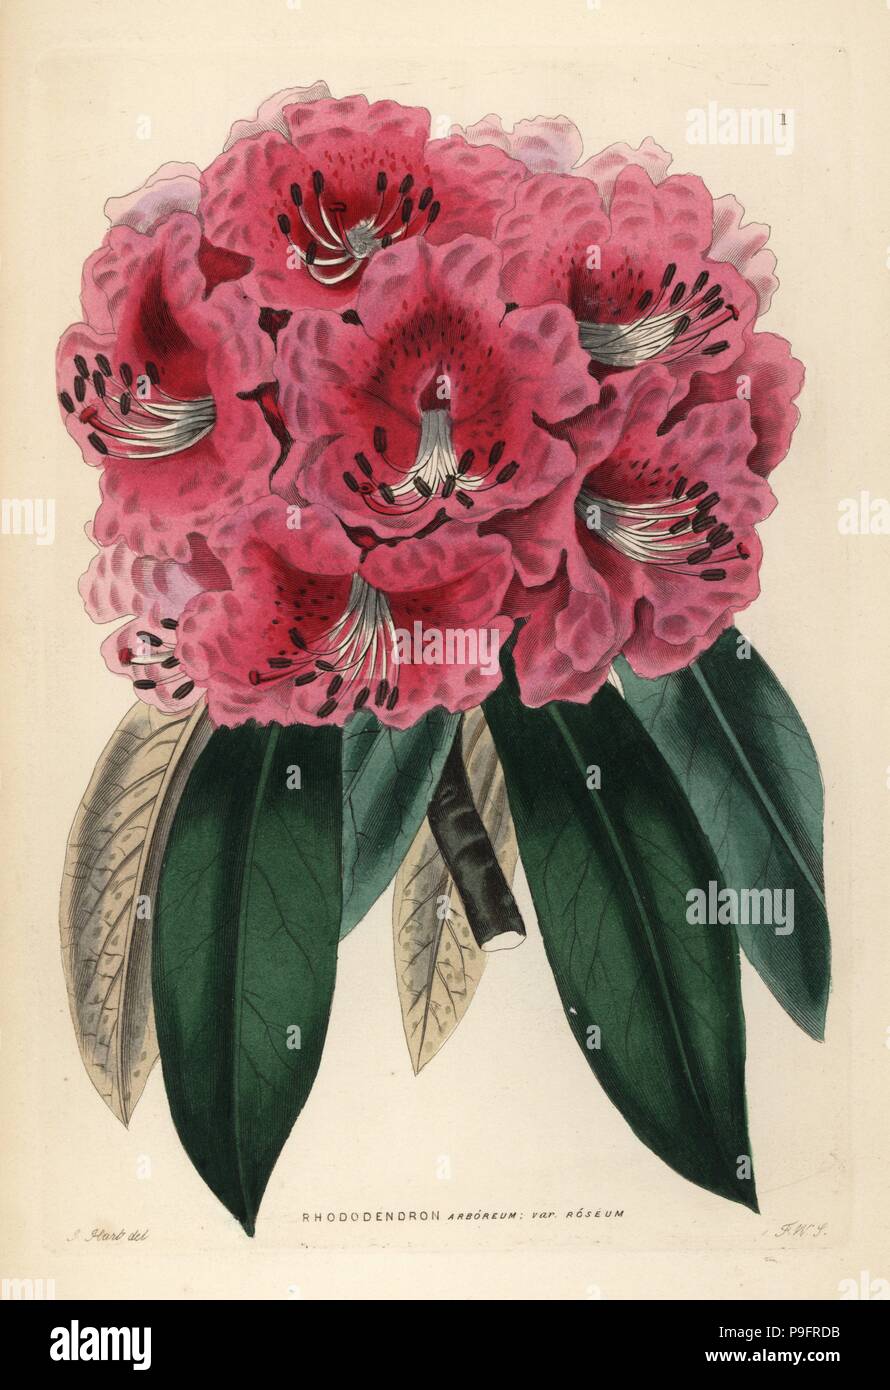 Rosy tree rhododendron, Rhododendron arboreum var. roseum. Handcoloured copperplate engraving by Frederick W. Smith after J. Hart from John Lindley and Robert Sweet's Ornamental Flower Garden and Shrubbery, G. Willis, London, 1854. Stock Photo